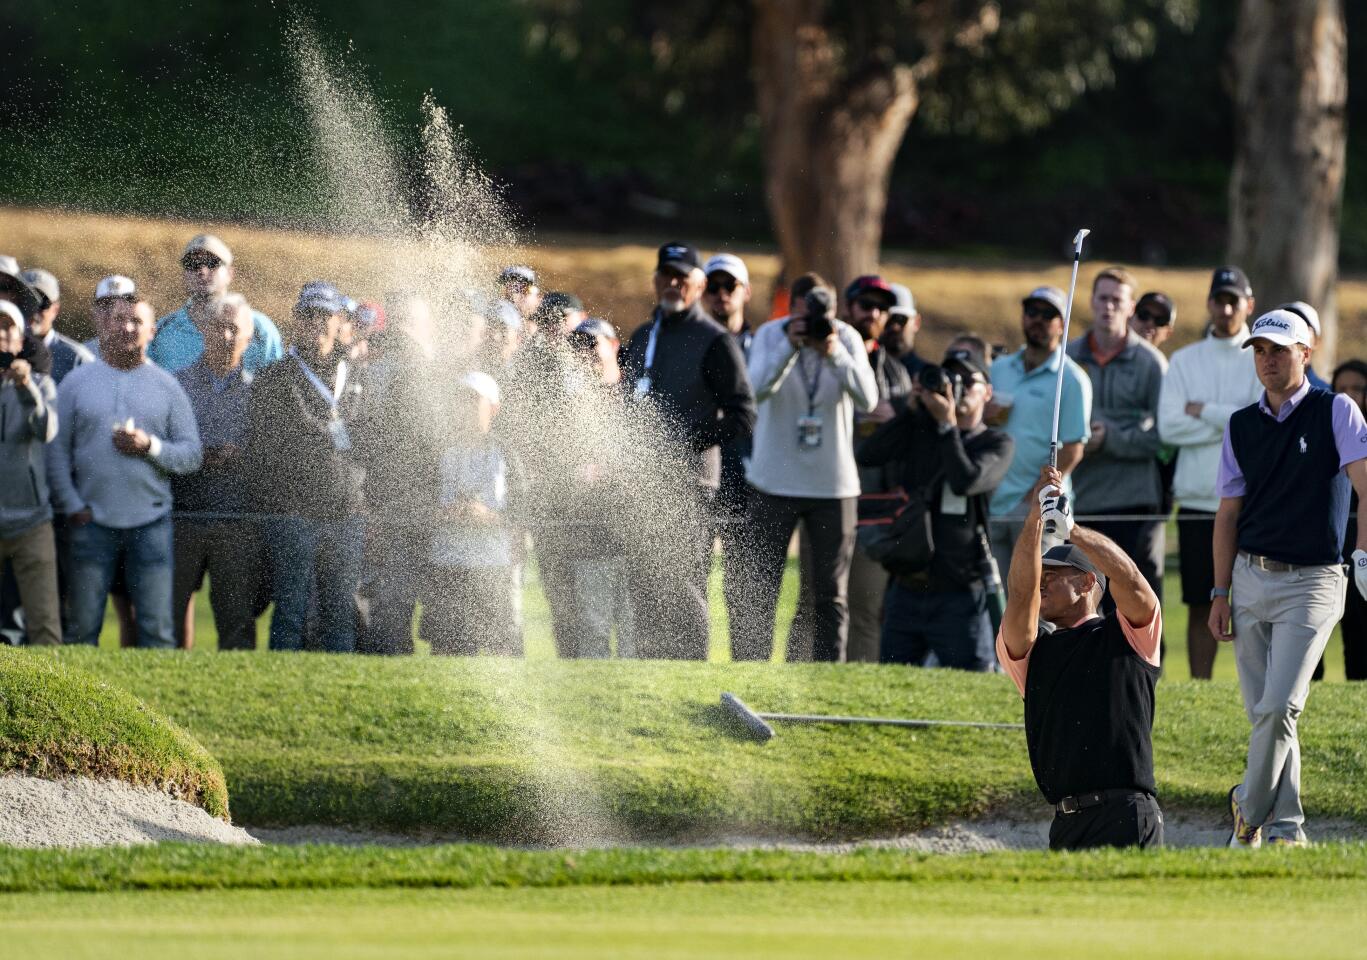 Tiger Woods hits out of a fairway bunker on the 17th hole during the first round of the Genesis Invitational at Riviera Country Club on Feb. 13, 2020.